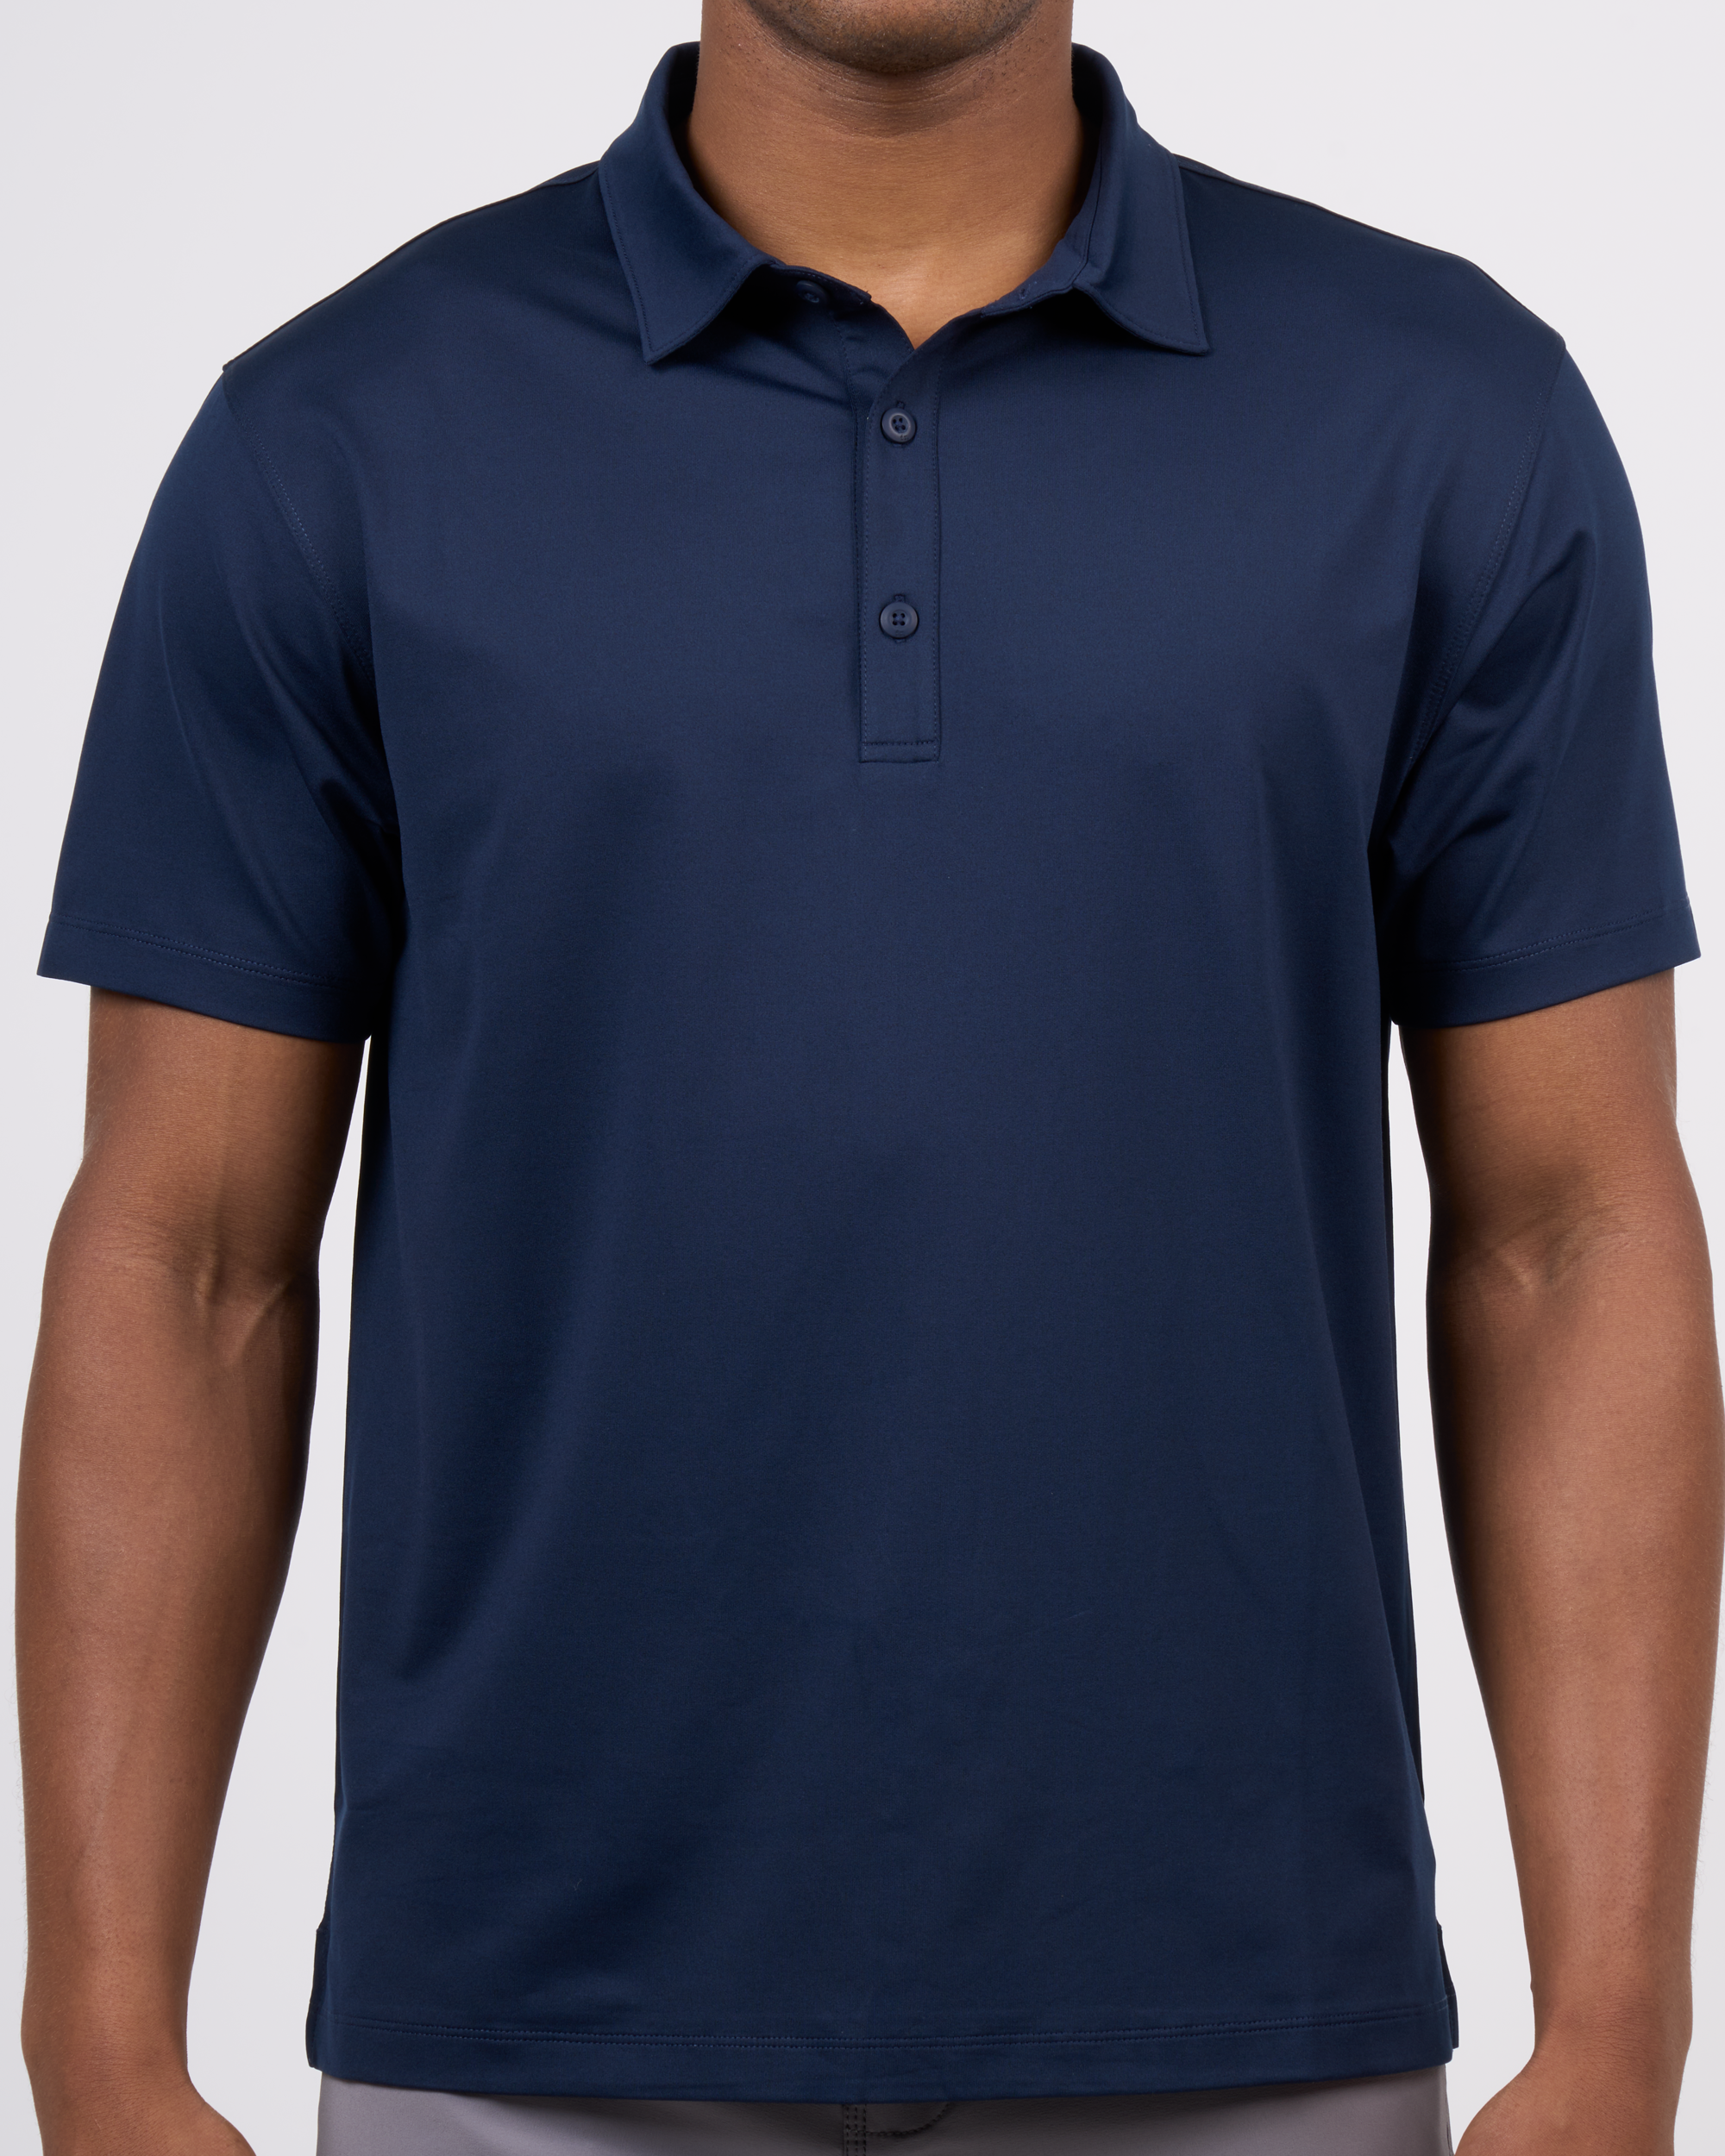 Foreign Rider Co Technical Fabric Navy Polo Chest 3 Button Detail